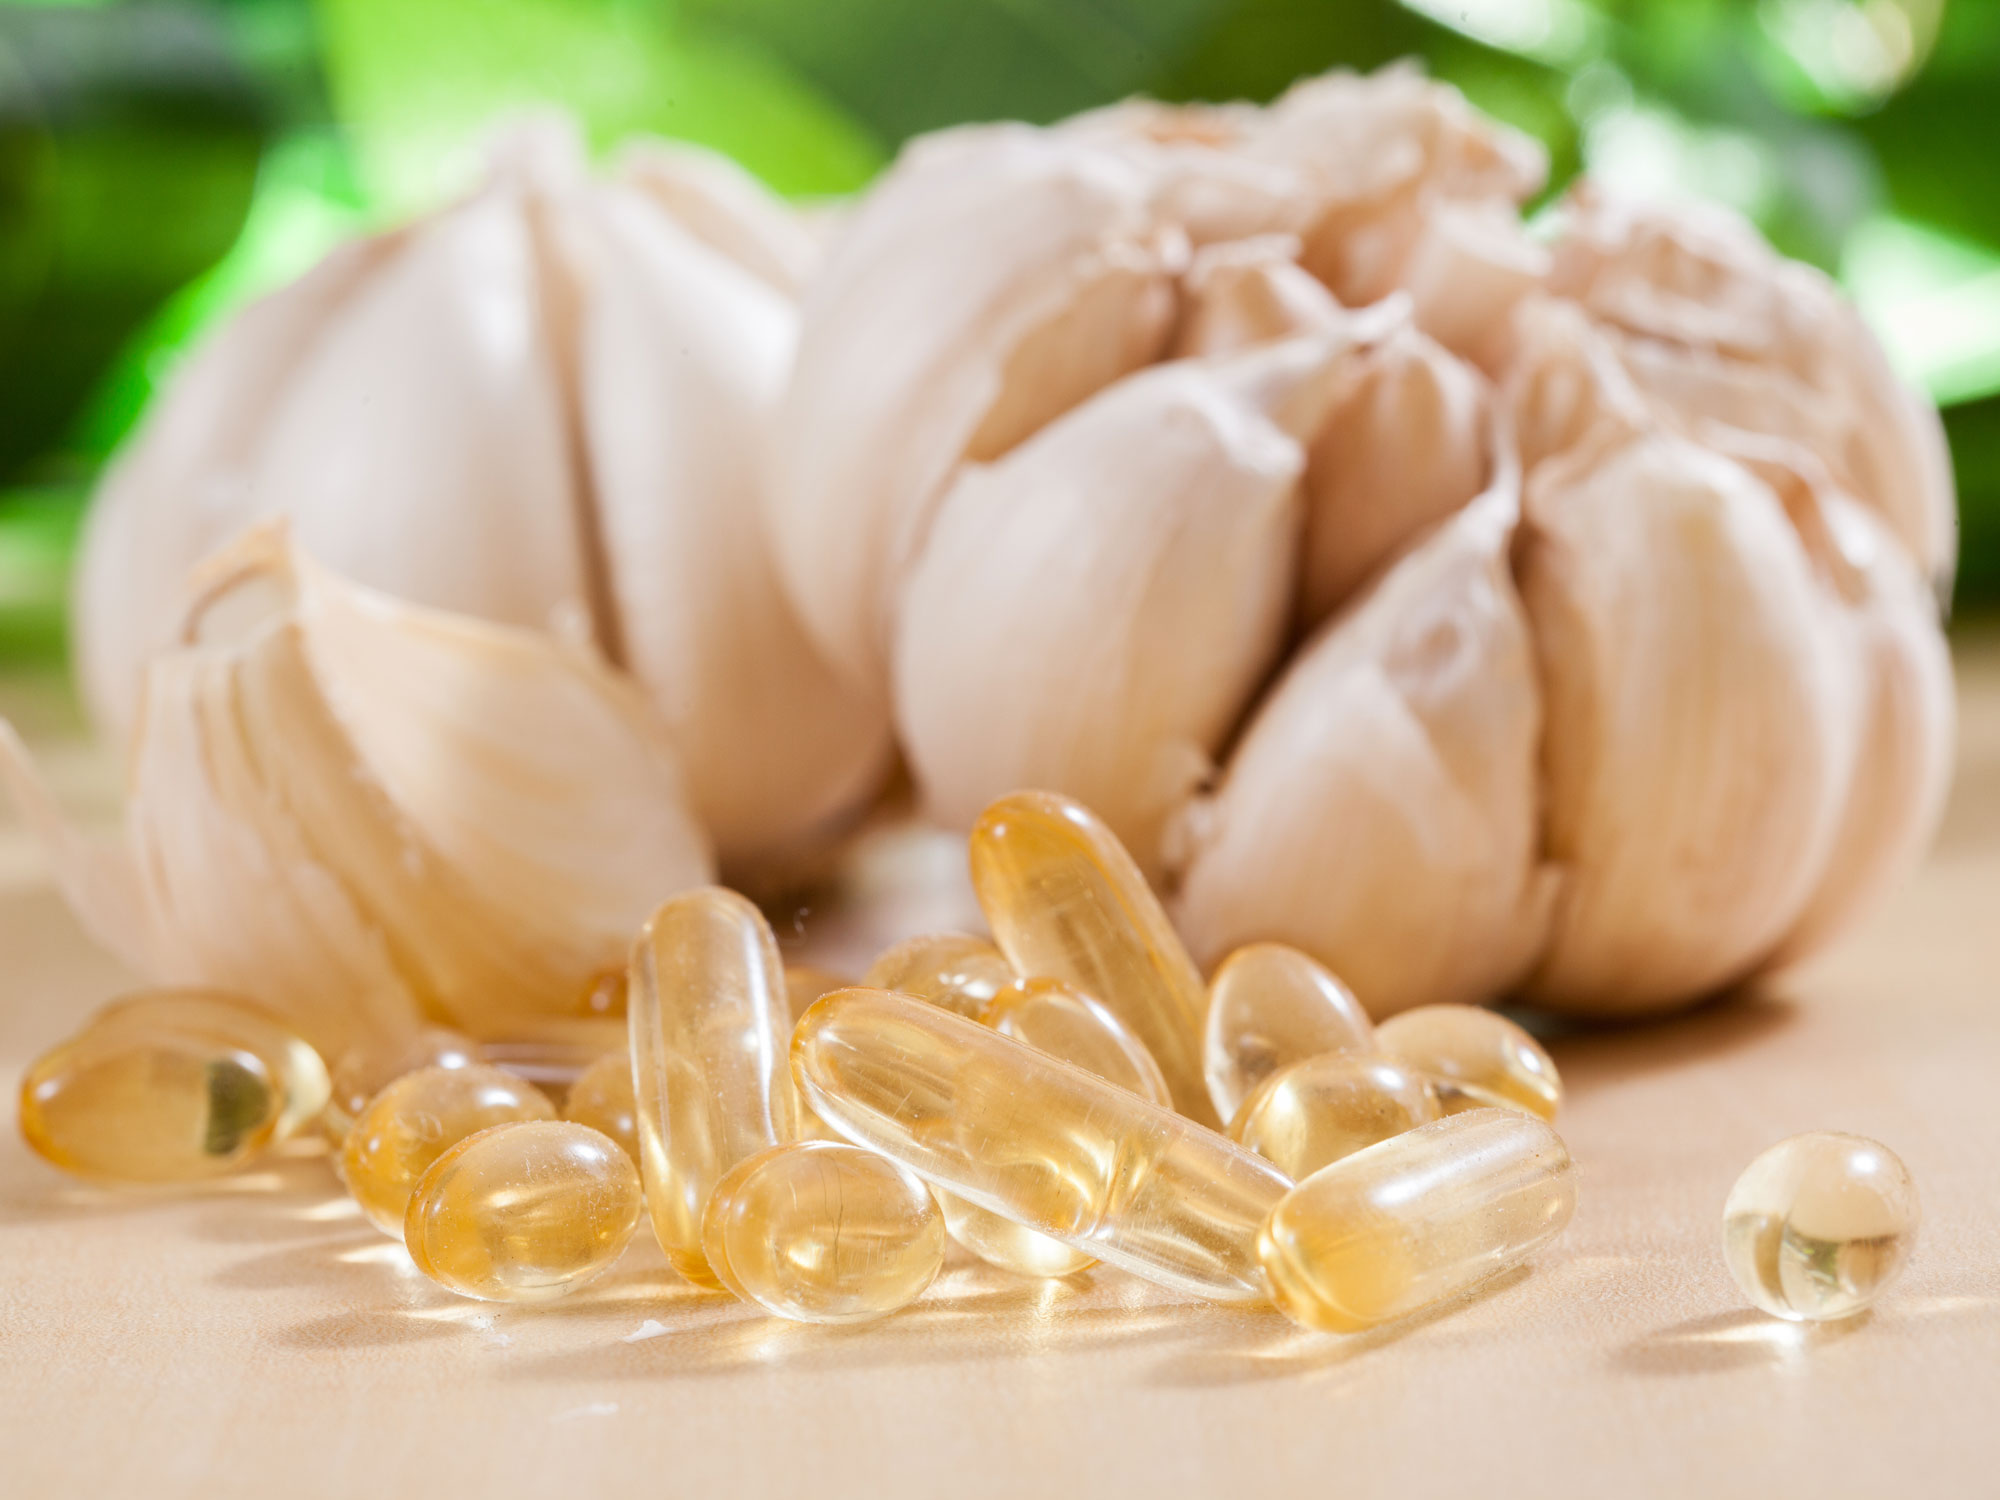 Is aged garlic the answer to obesity?